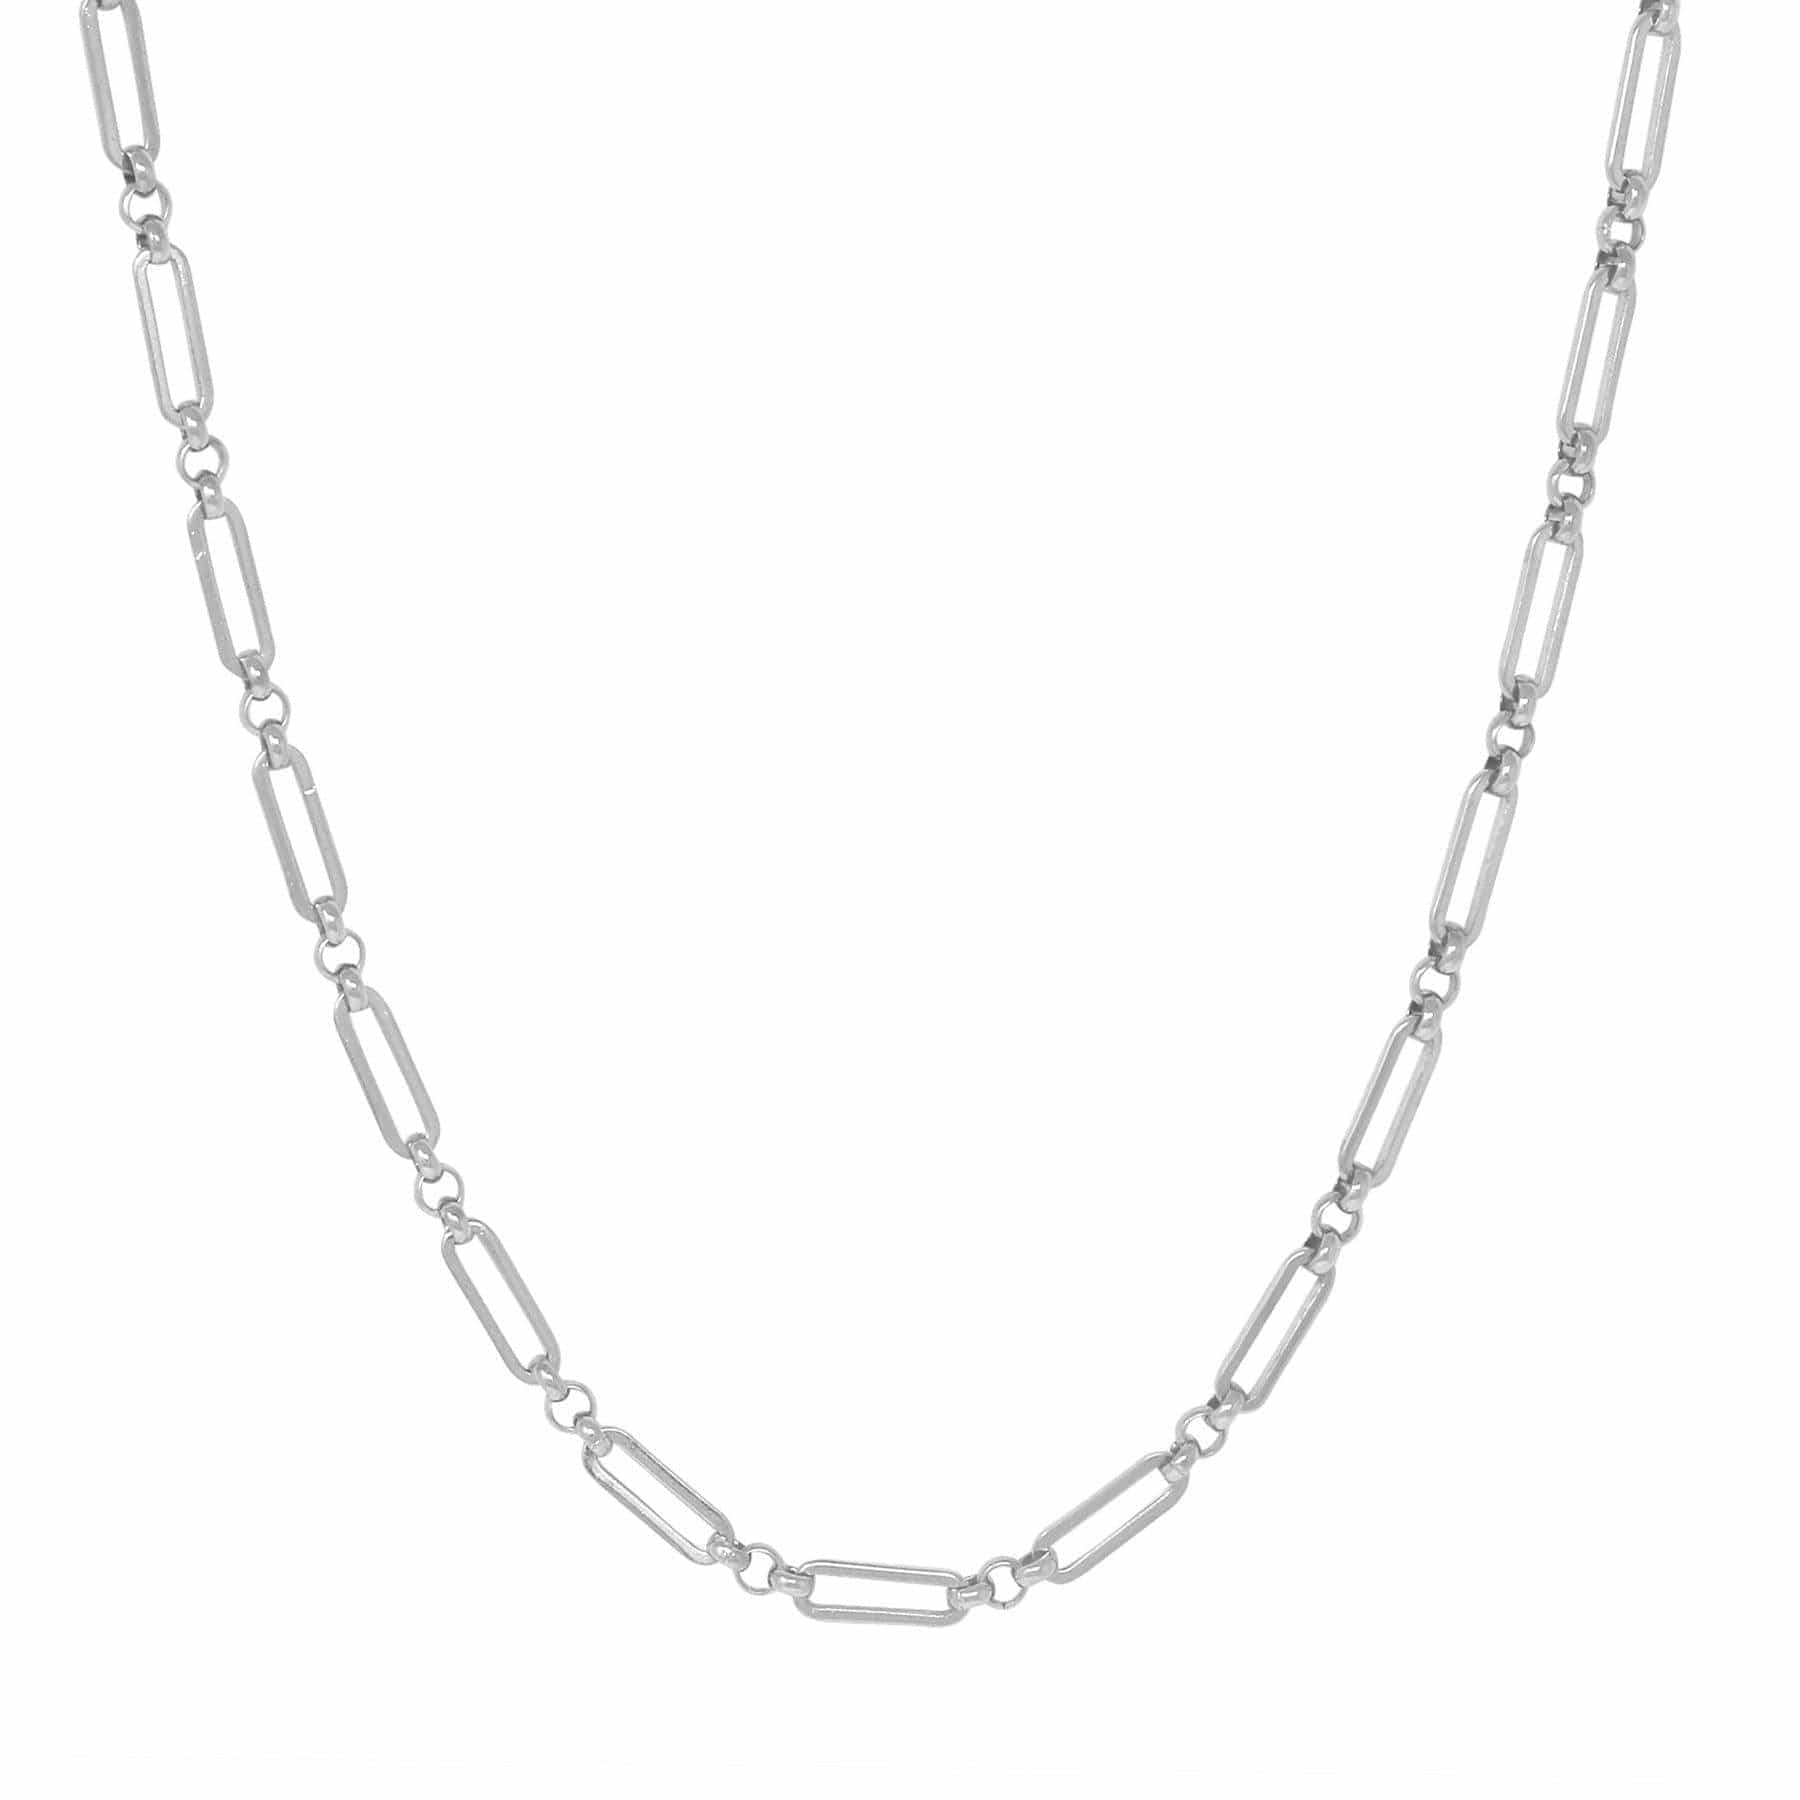 BohoMoon Stainless Steel Axel Chain Choker / Necklace Silver / Choker